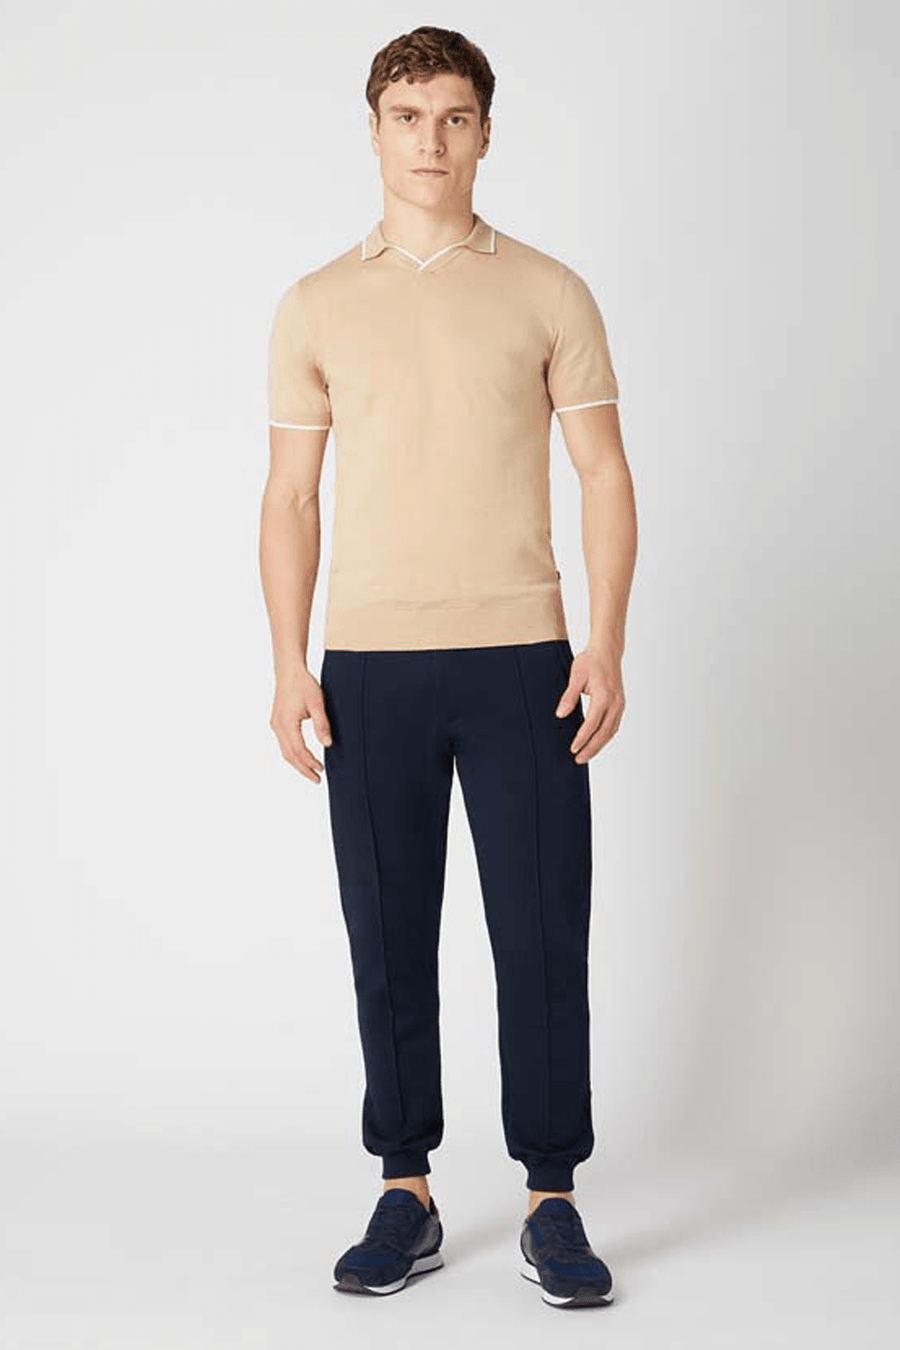 Buy the Remus Uomo S/S Open Collar Polo in Beige at Intro. Spend £50 for free UK delivery. Official stockists. We ship worldwide.